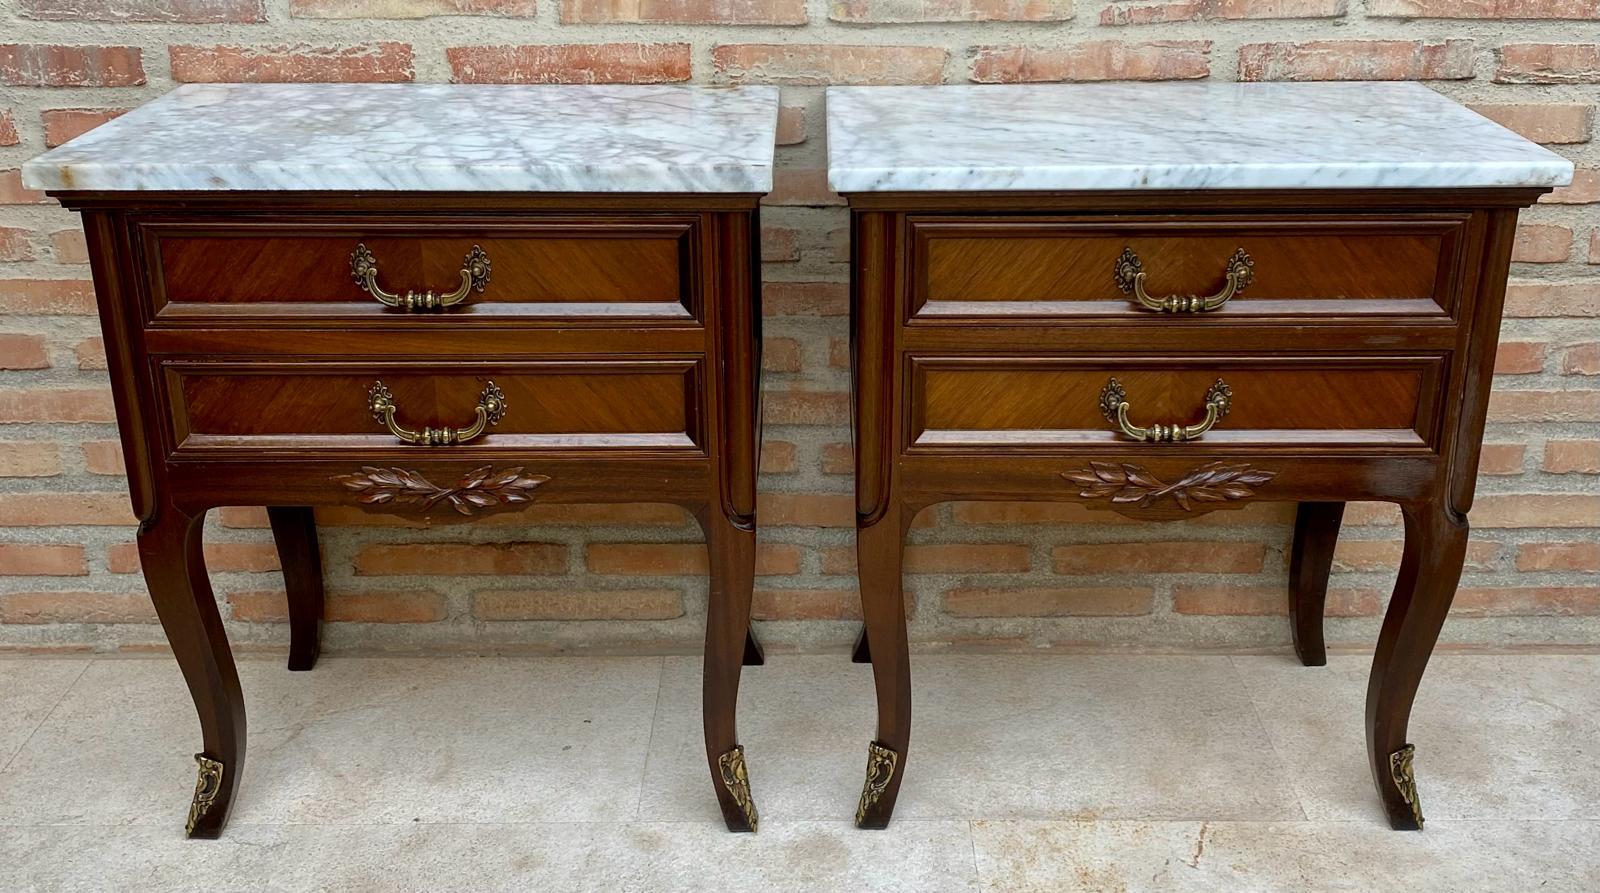 We are delighted to introduce this pair of French walnut nightstands.
The front drawers have this beautiful burr in the wood, with original handles to open all the drawers and white marble top.
Also, the legs are very well carved and shaped.

We